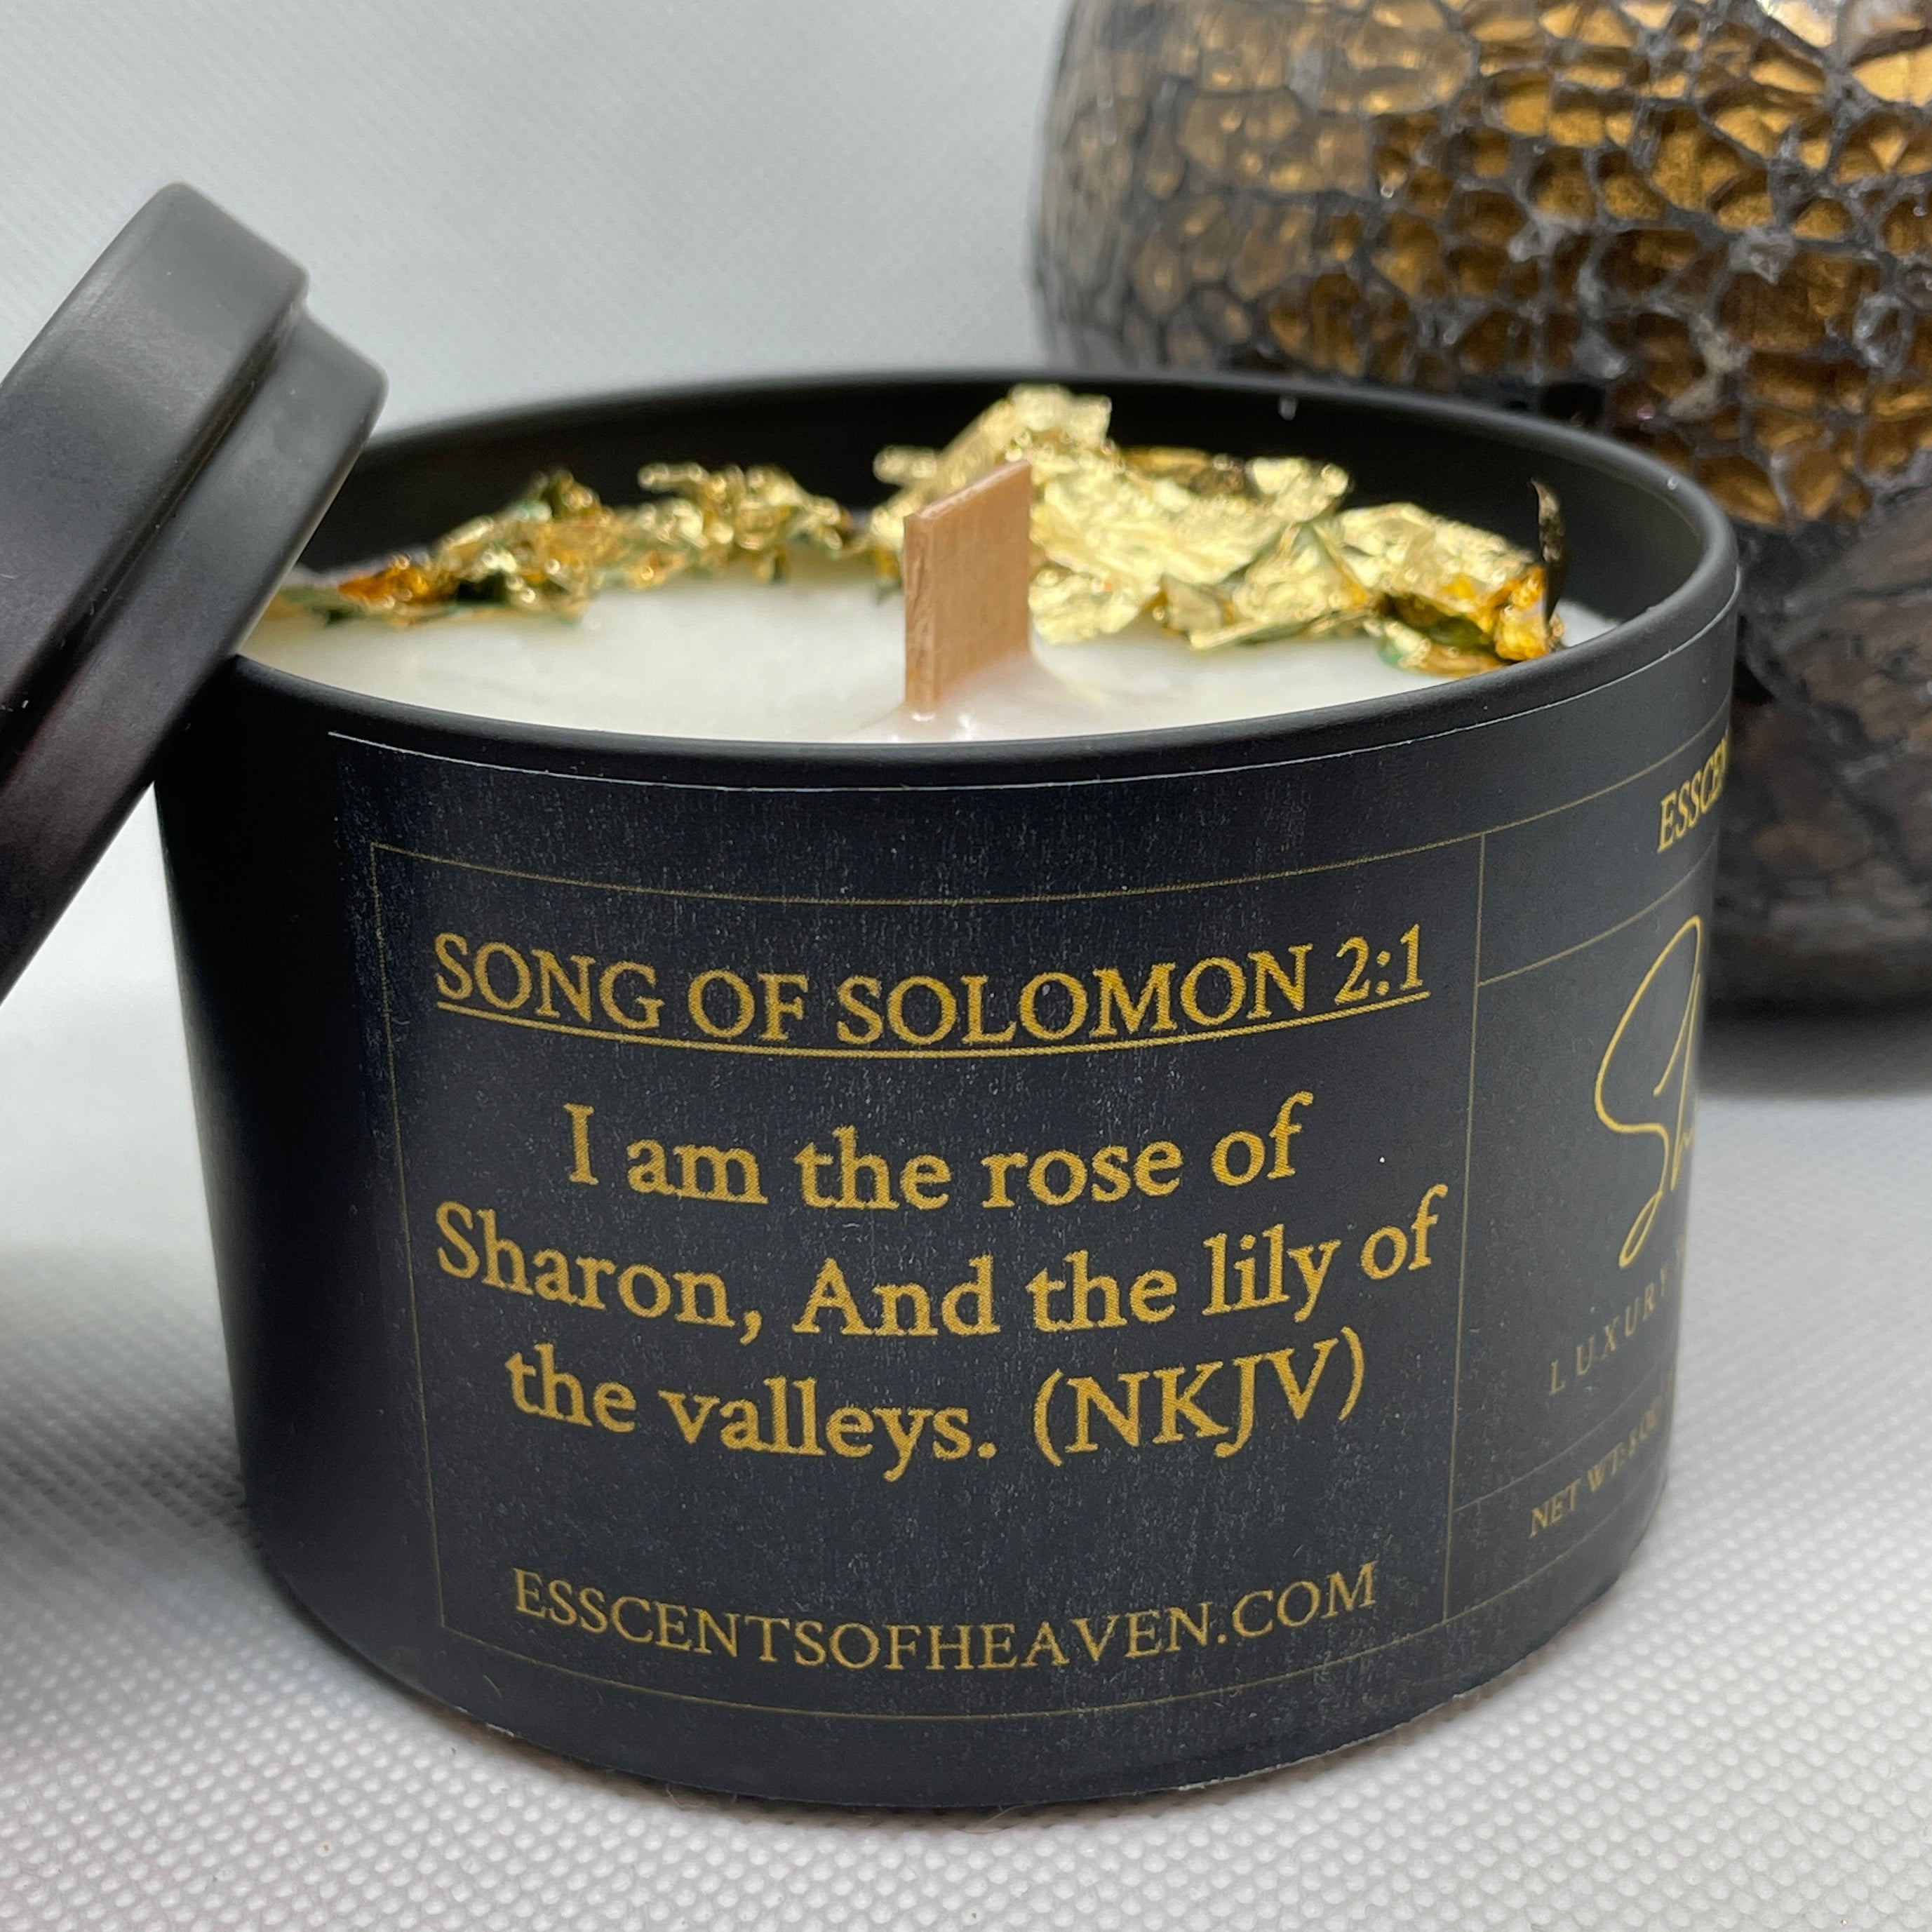 "The Rose of Sharon" Gold Leaf Candle